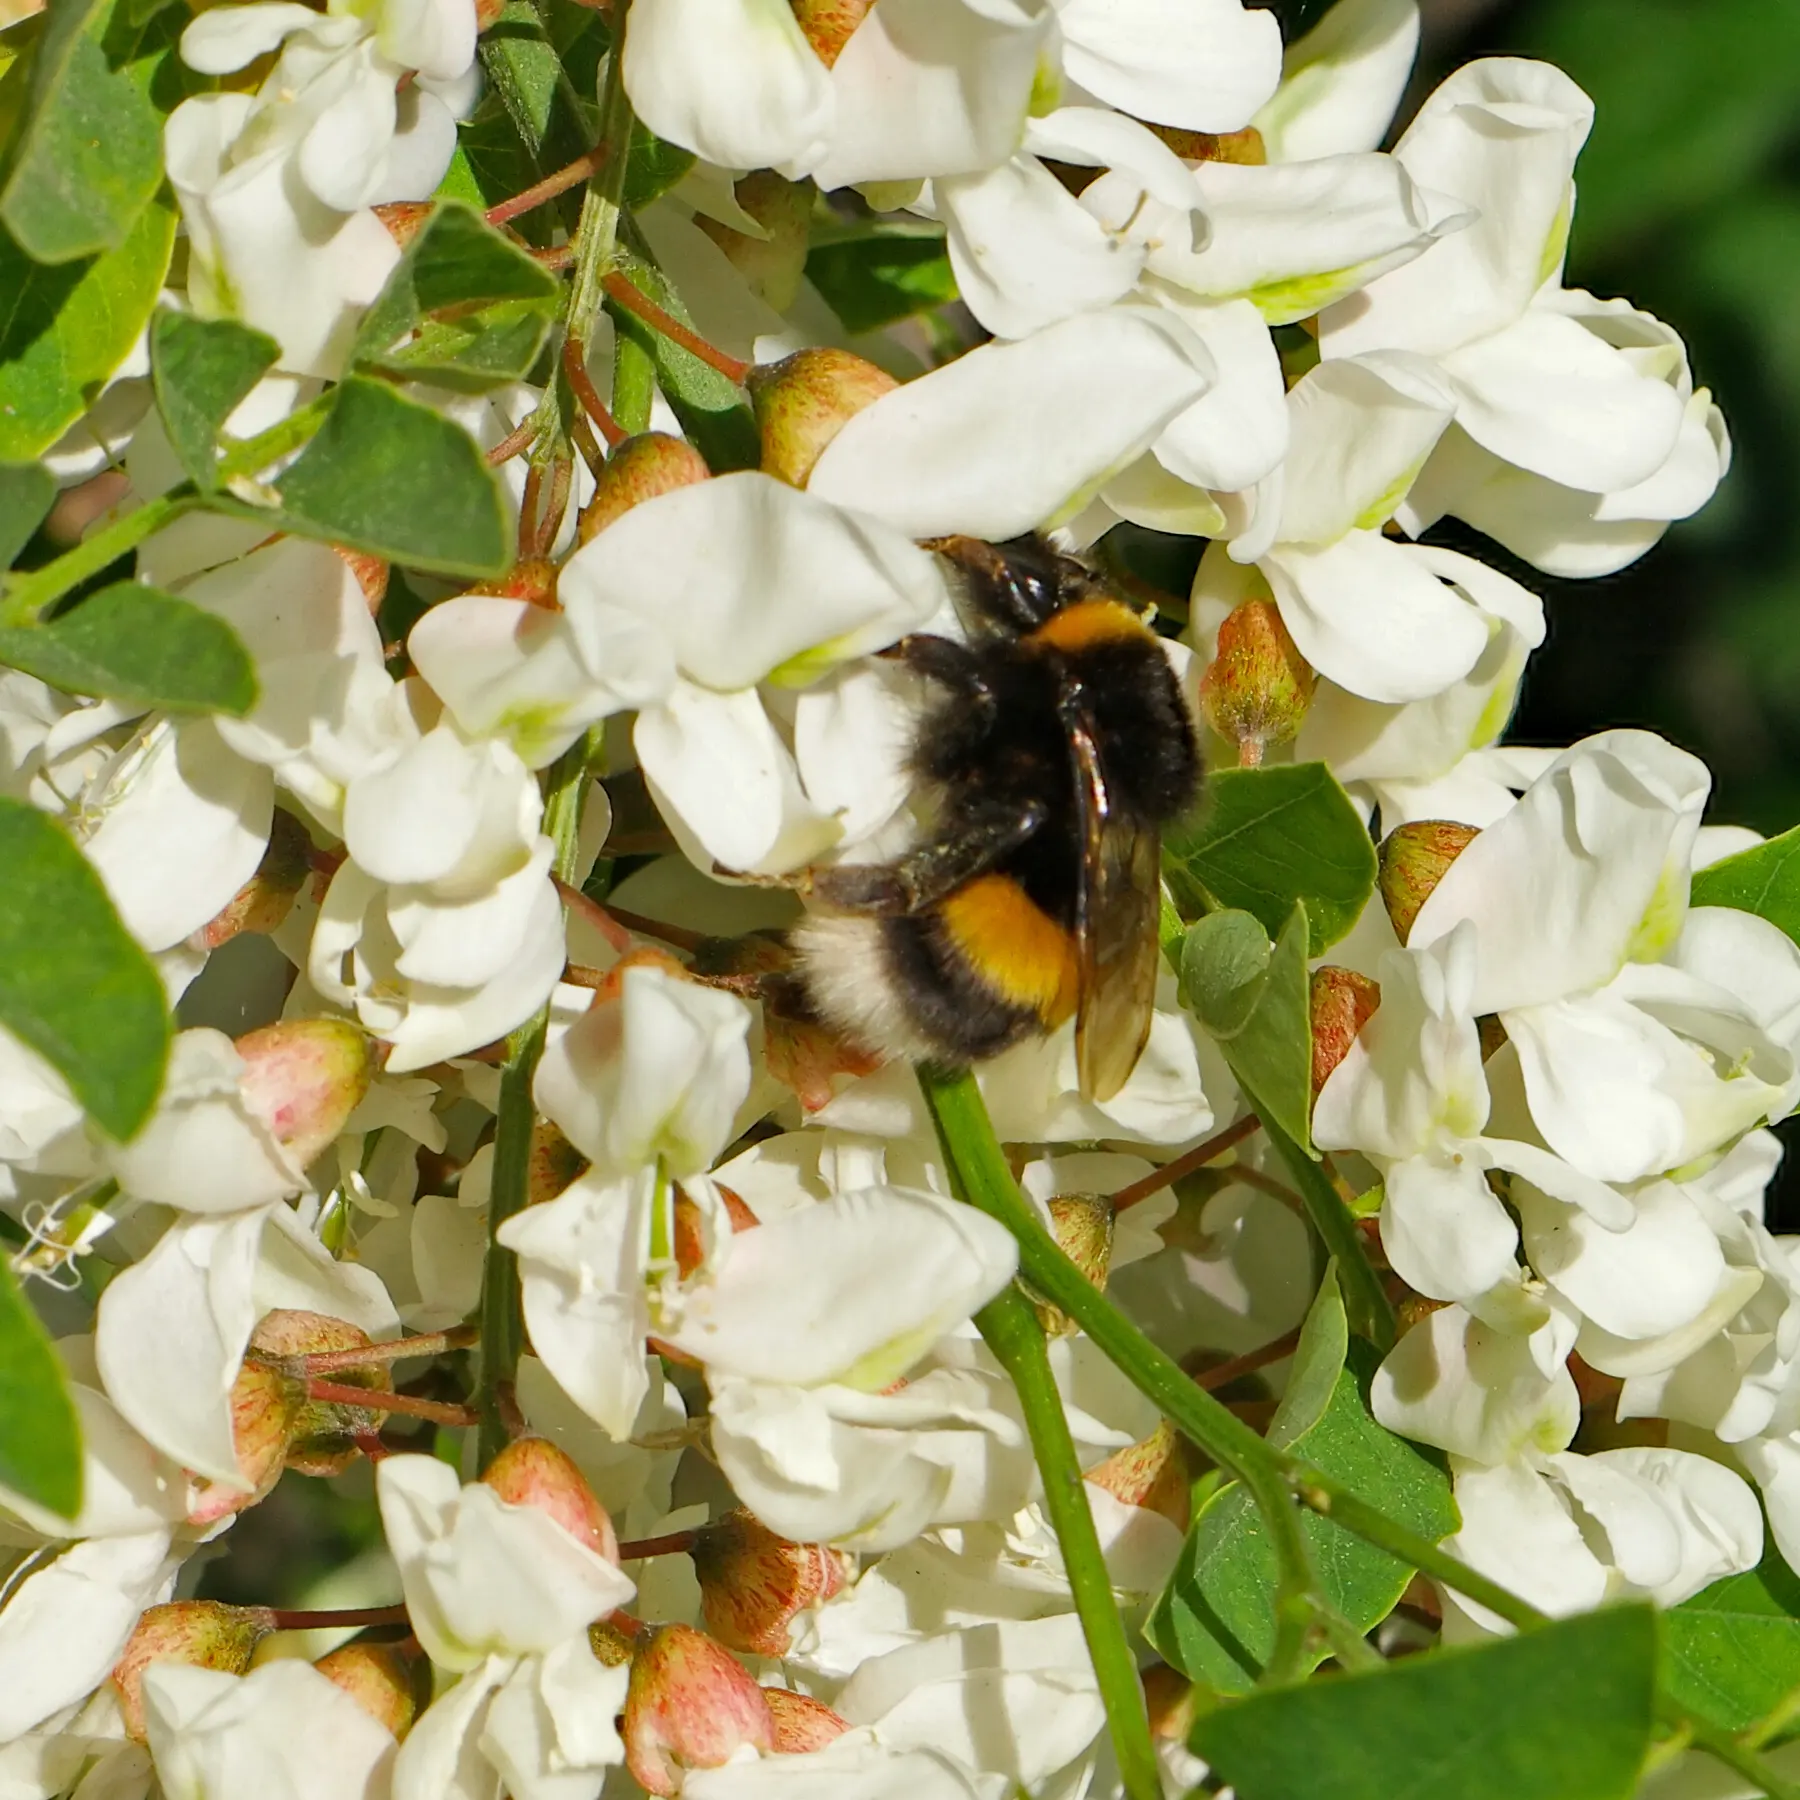 A bumblebee pollinates the flowers of the black locust tree